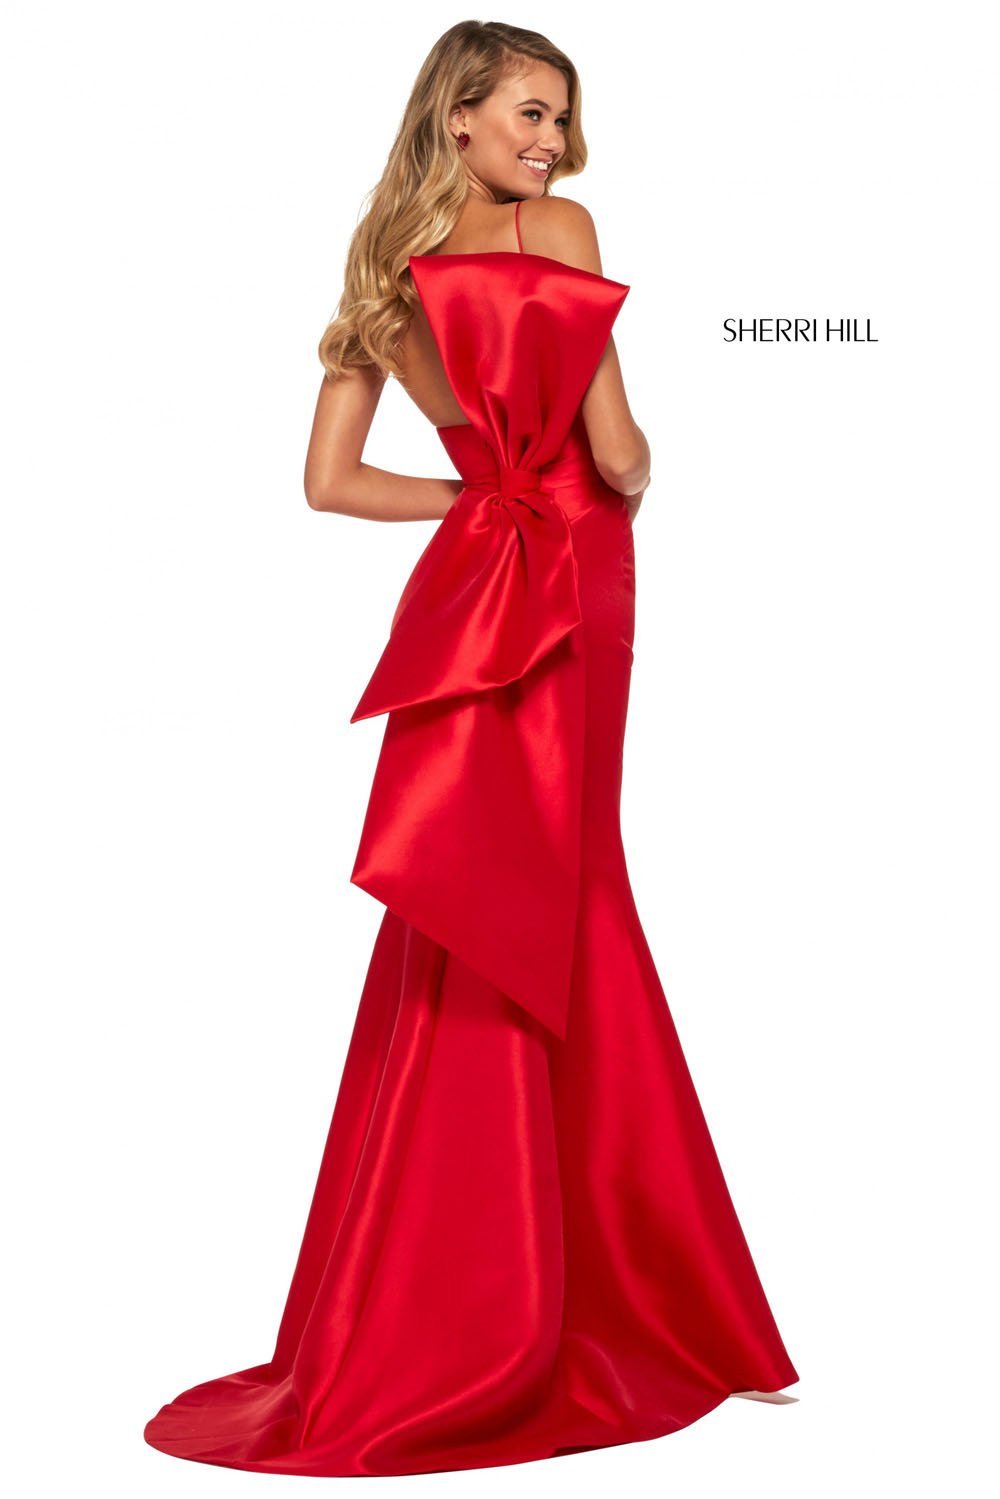 Sherri Hill 53336 dress images in these colors: Ivory, Light Blue, Black, Candy Pink, Red, Yellow.